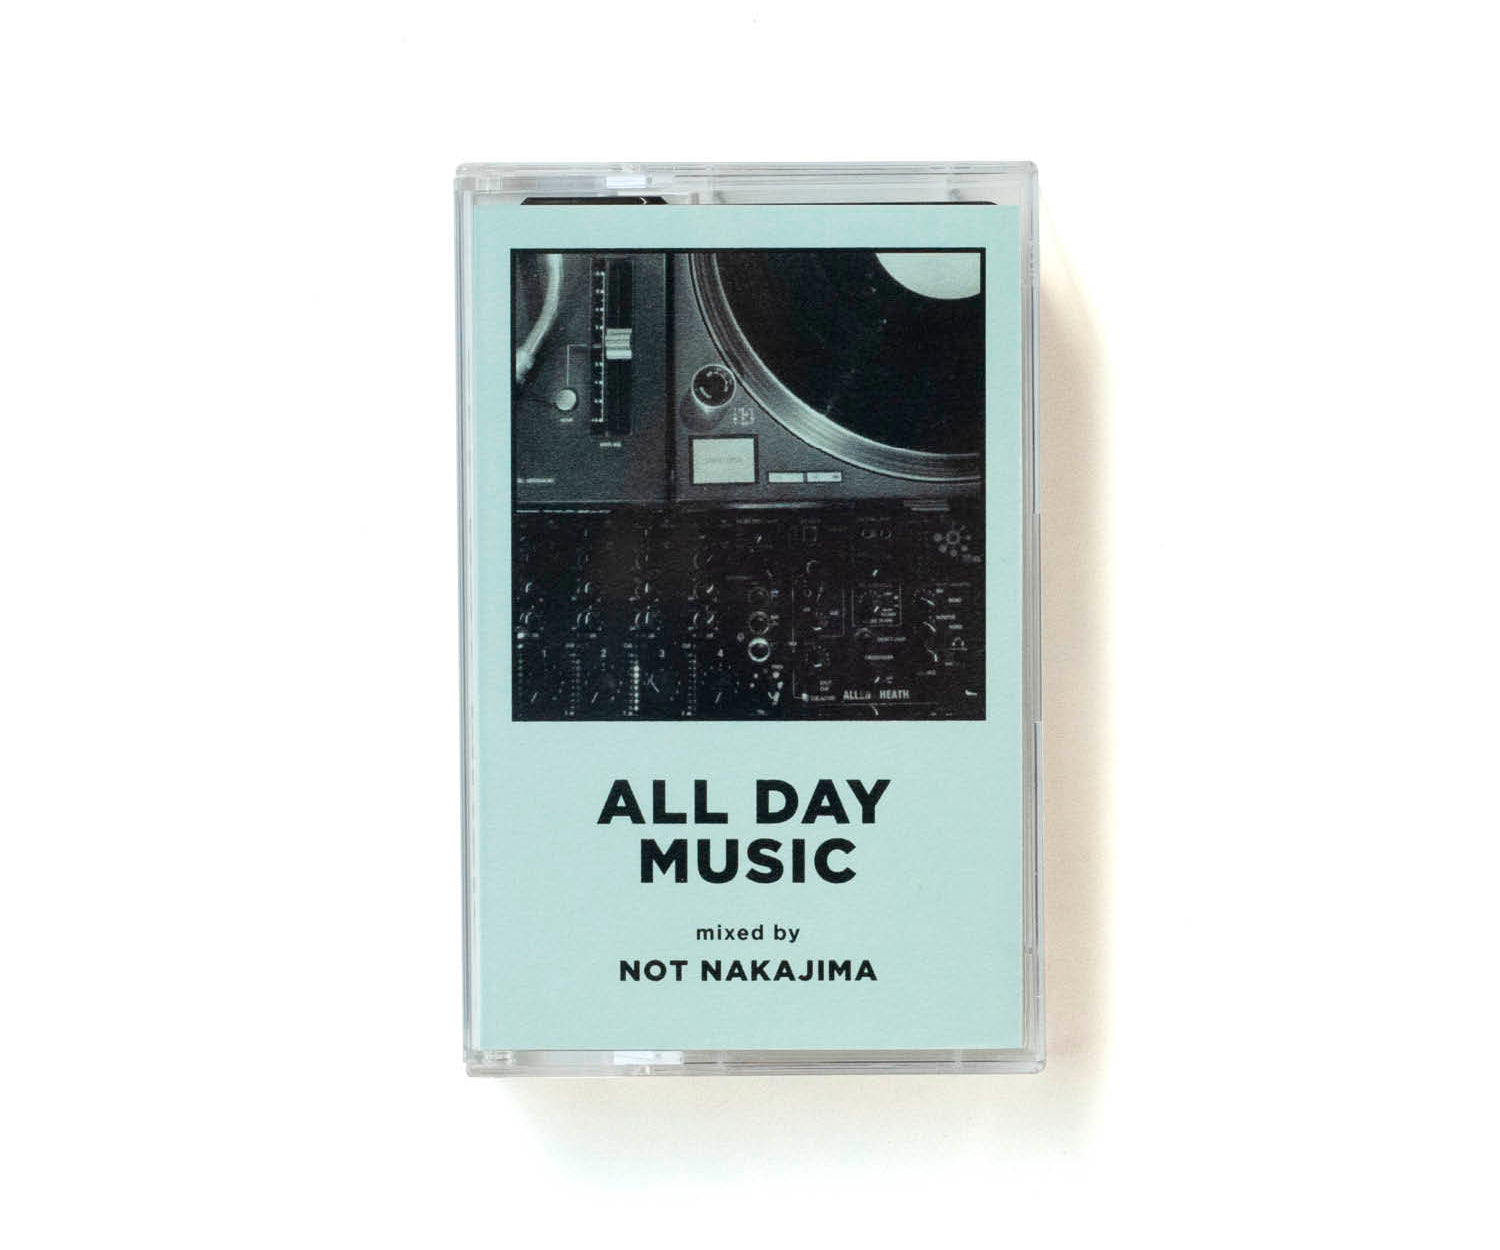 A.D.M. #6 - Mixed by NOT NAKAJIMA | LIKE THIS SHOP